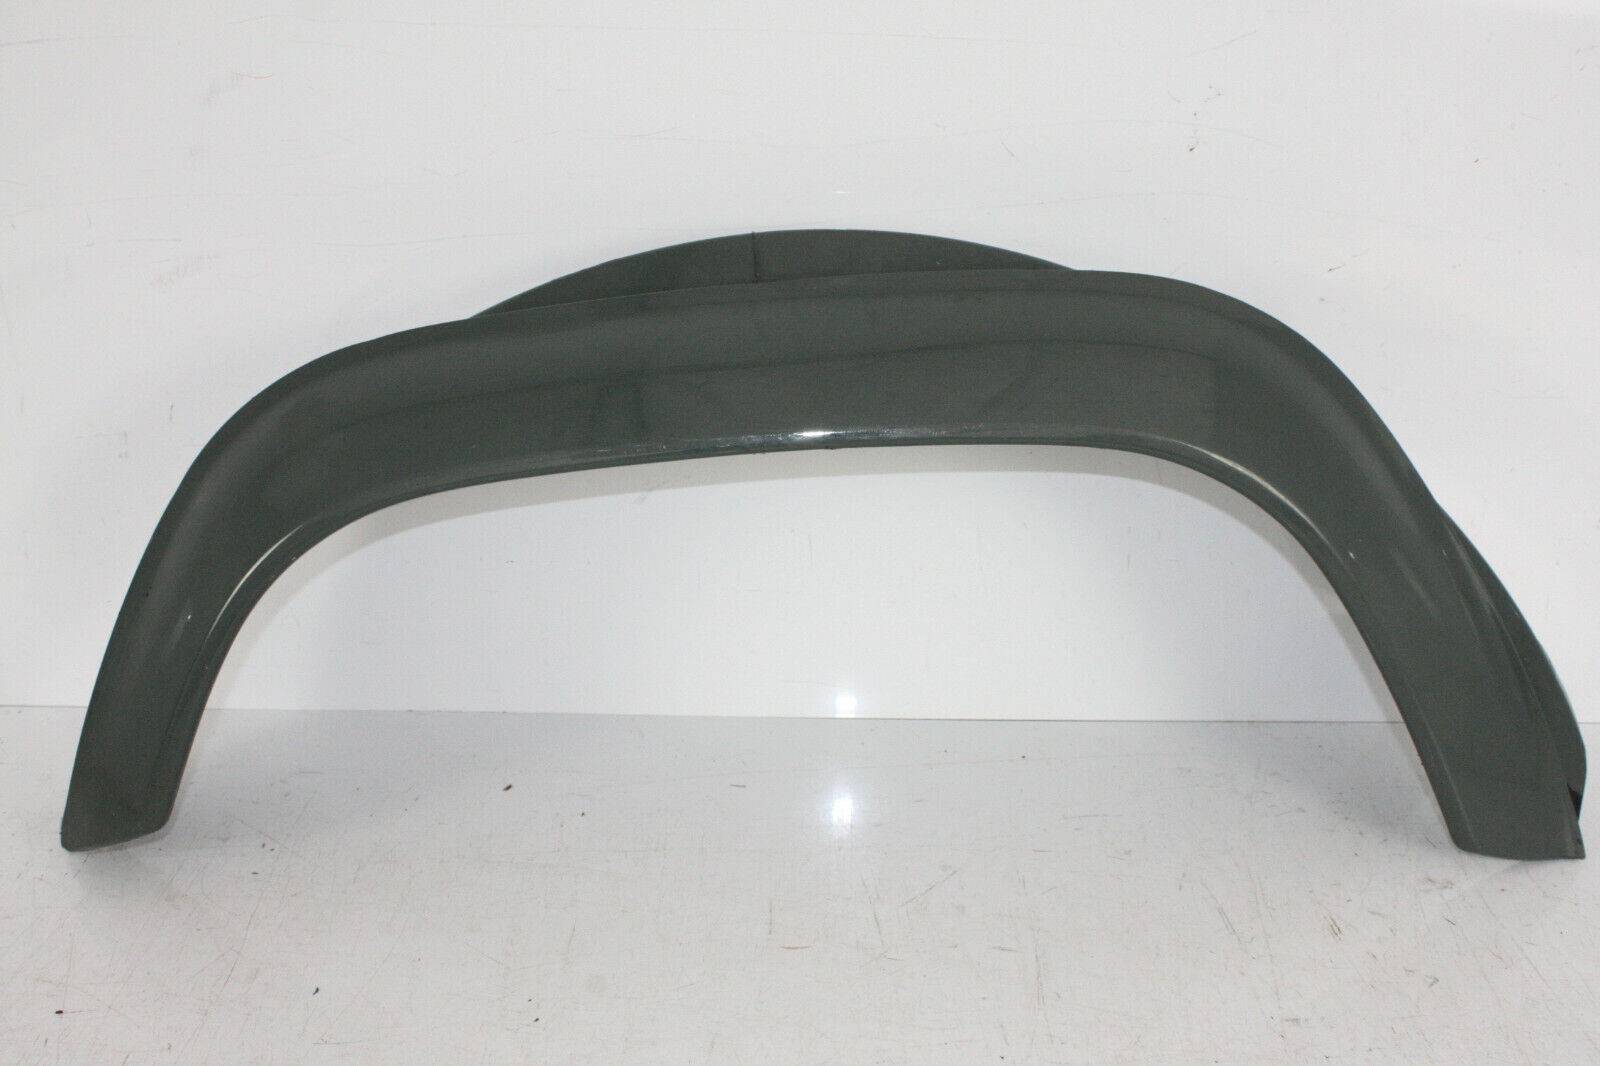 LAND ROVER DEFENDER WHEEL ARCH FLARE SPAT FRONT LEFT PAINTED TYPE GENUINE 175367529954